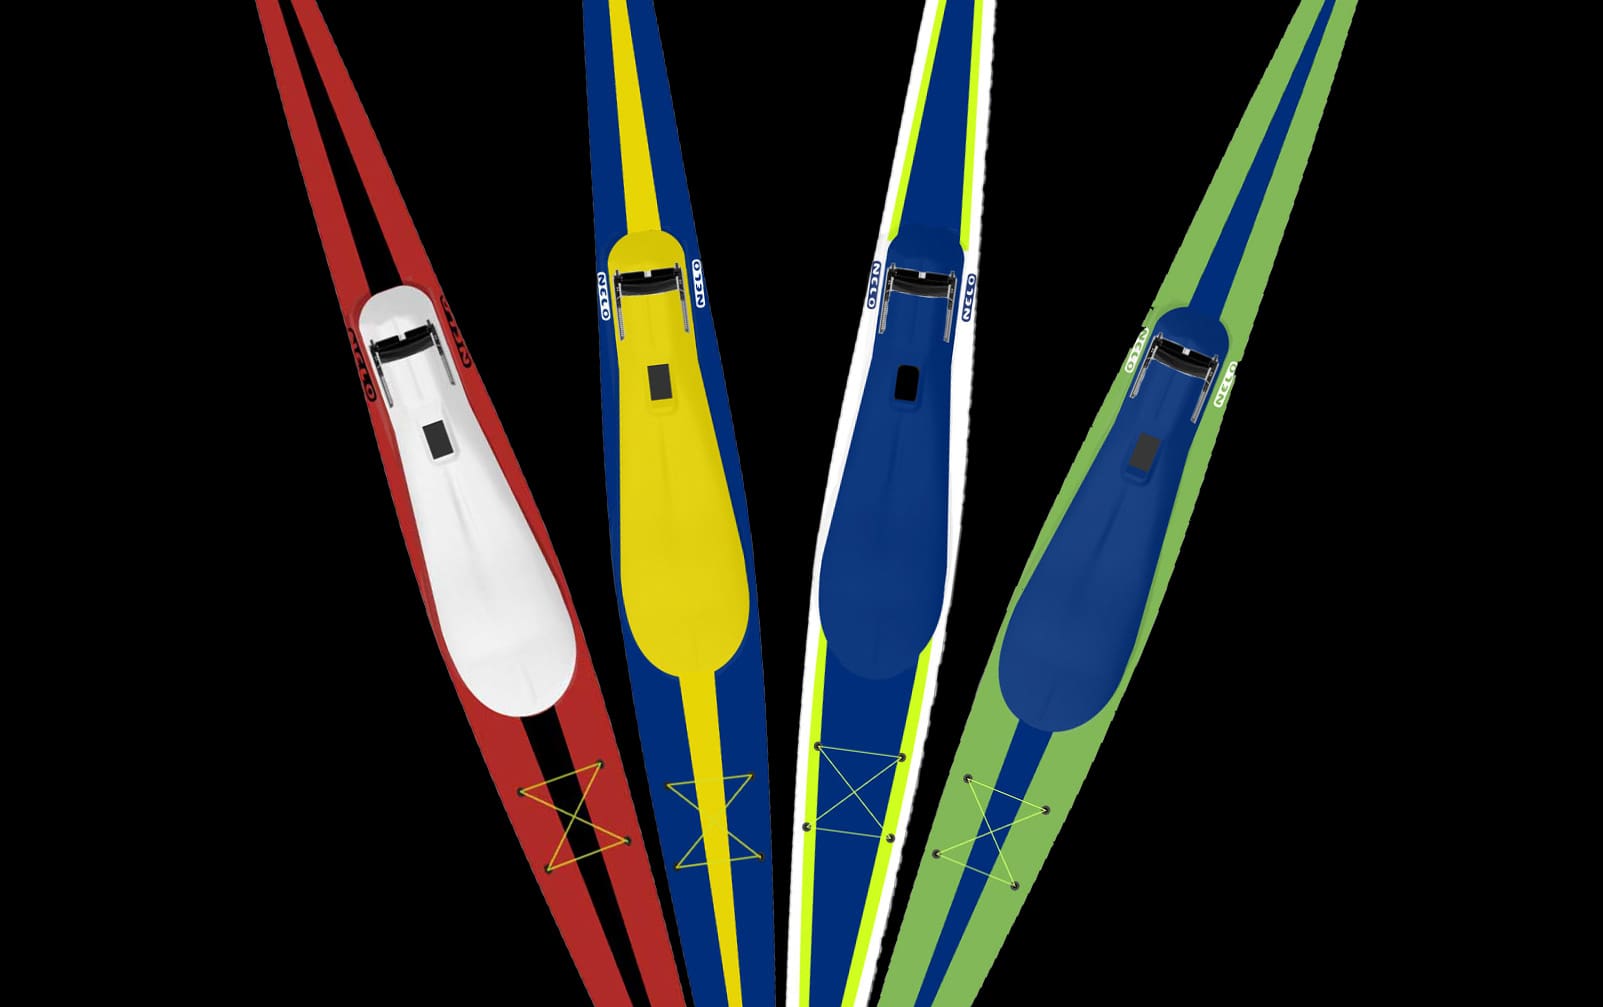 Nelo surfskis for sale in New England